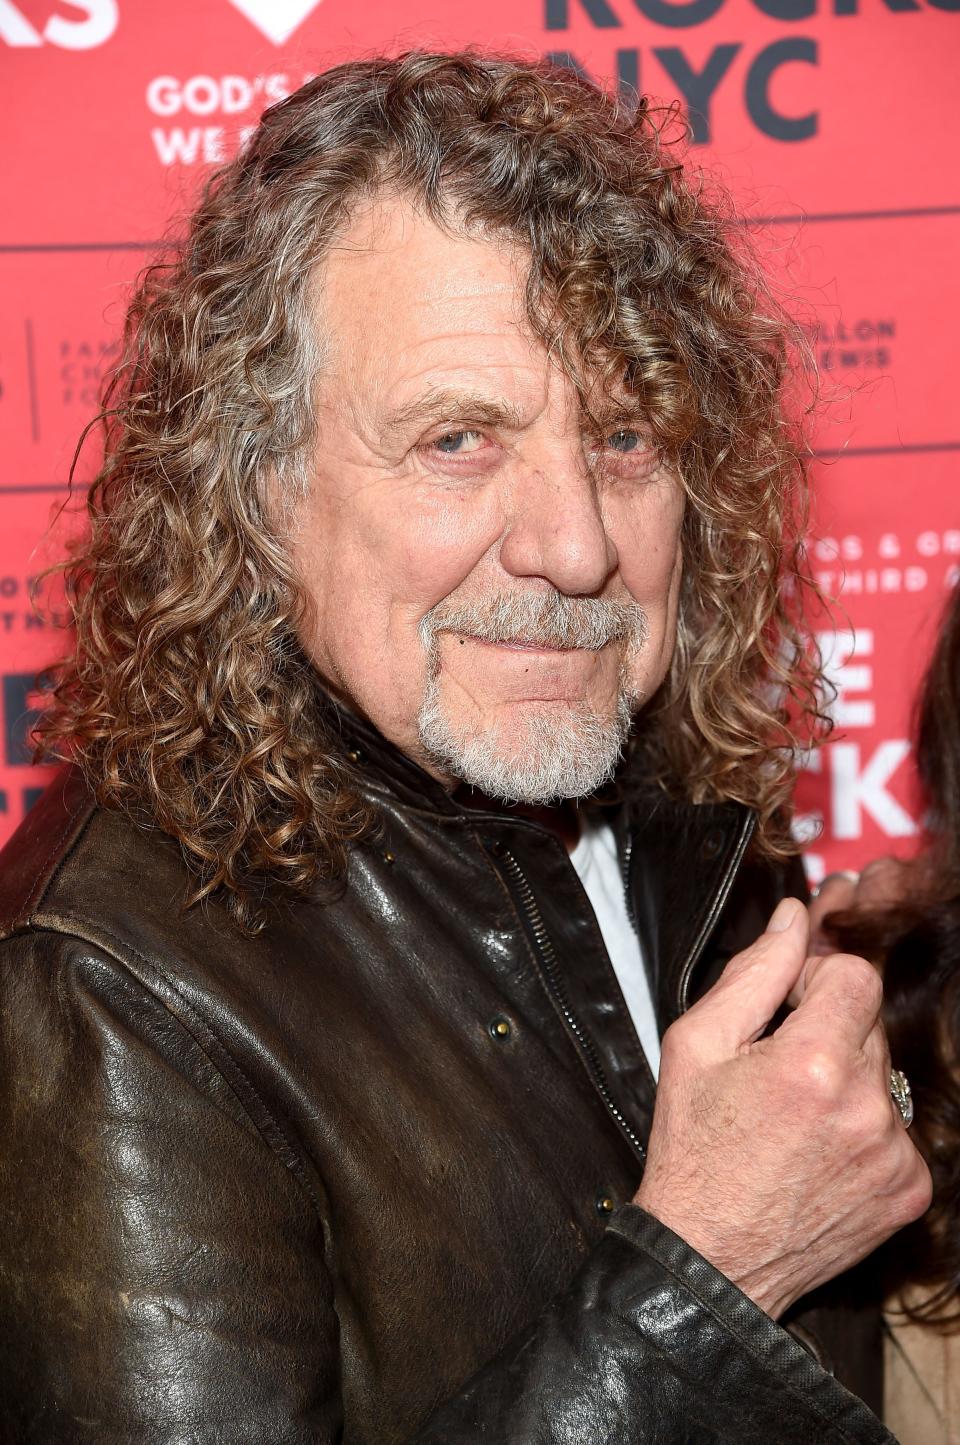 Rock great Robert Plant will be part of the 2022 Memphis Music Hall of Fame induction ceremonies.